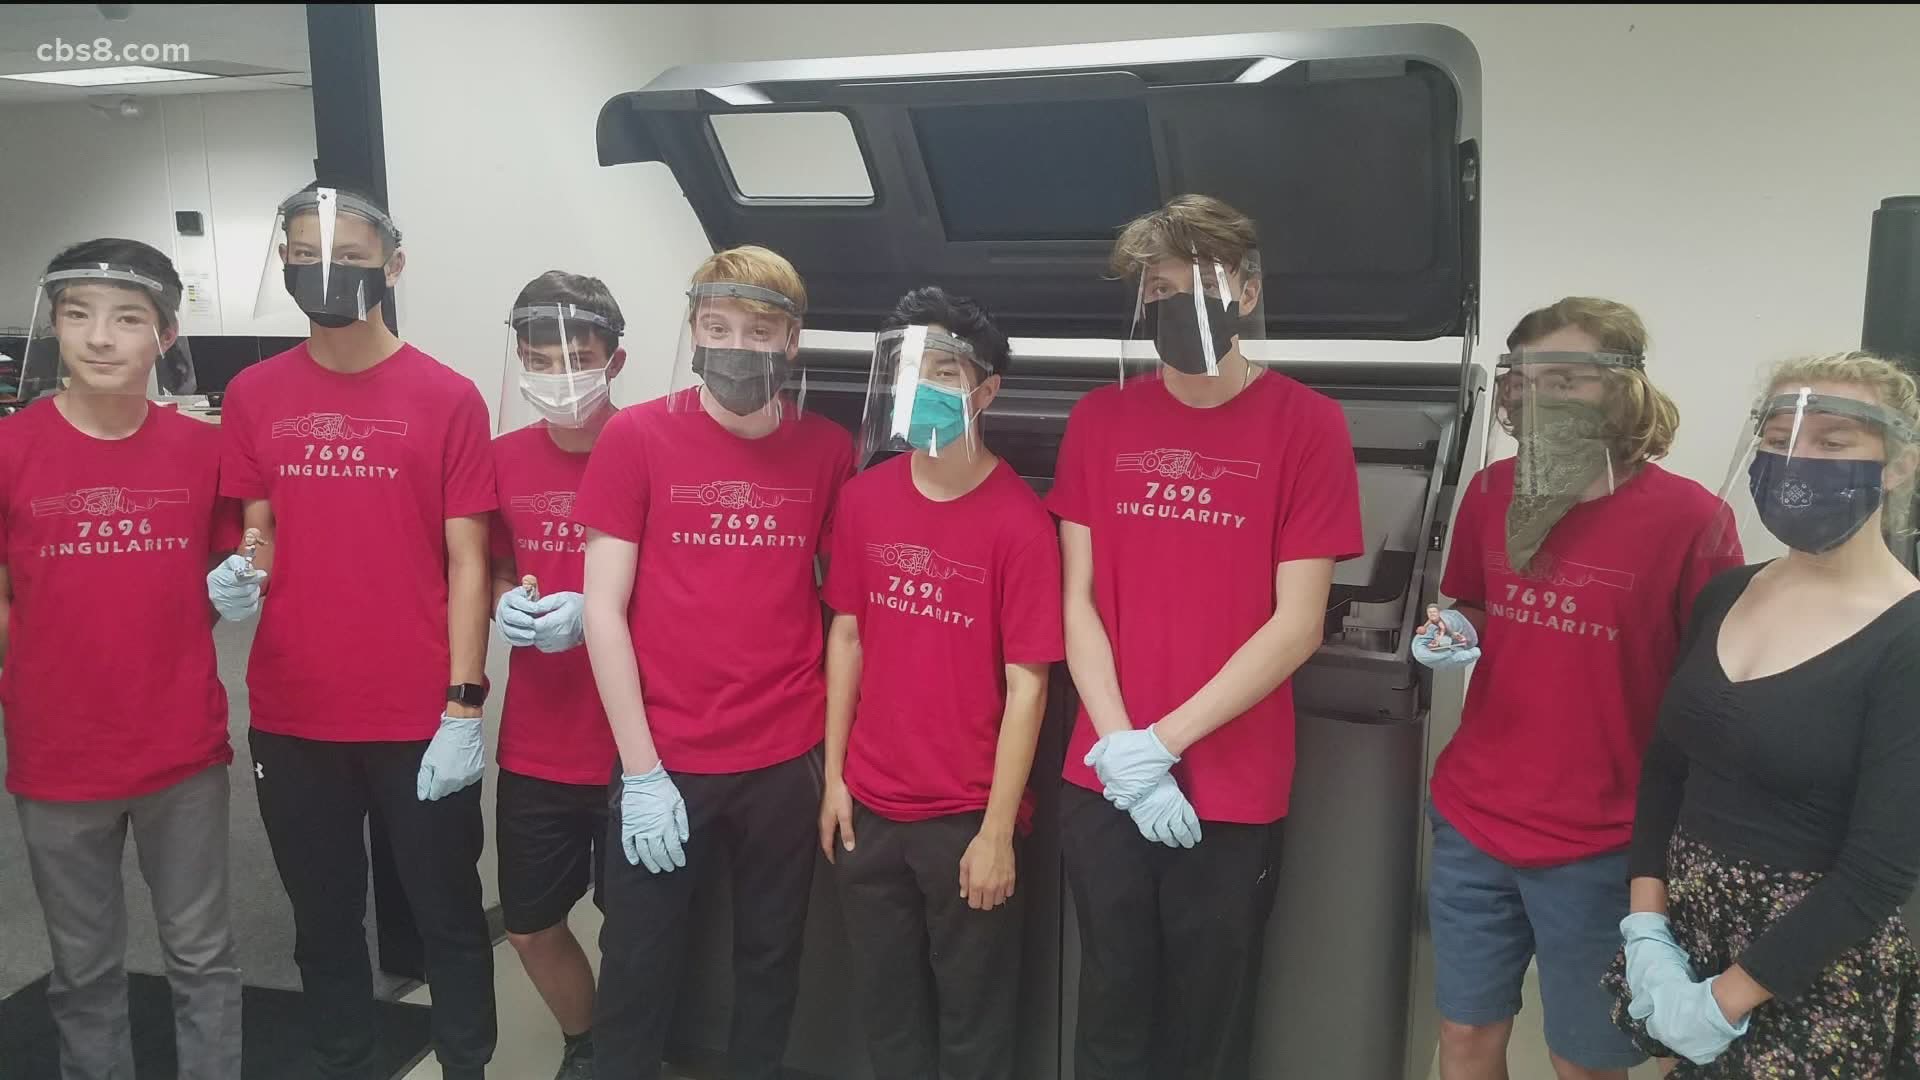 San Diego high school robotics students are using 3D printing to produce face shields to aid healthcare workers and patients to protect themselves from COVID-19.